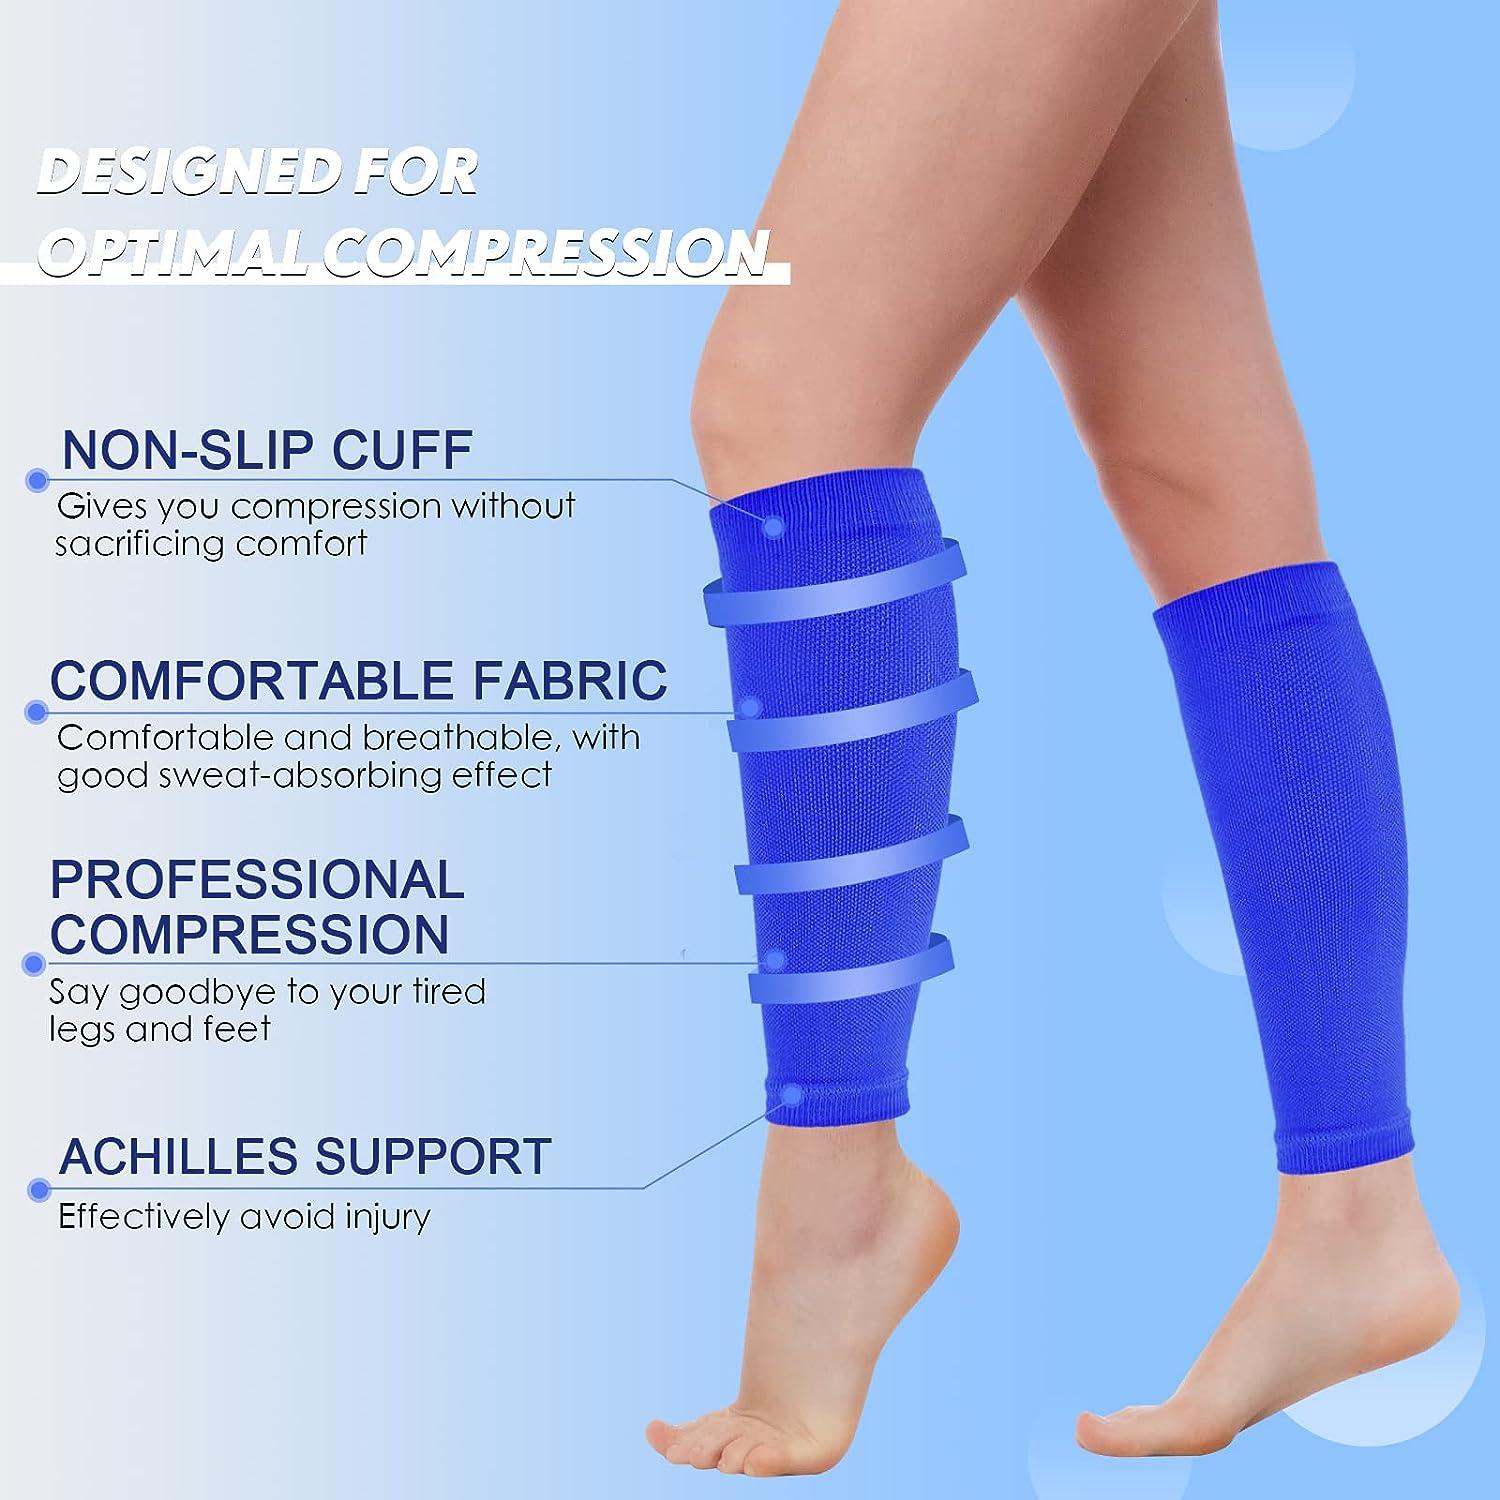 Two Pairs Calf Compression Sleeves for Men Women. Footless